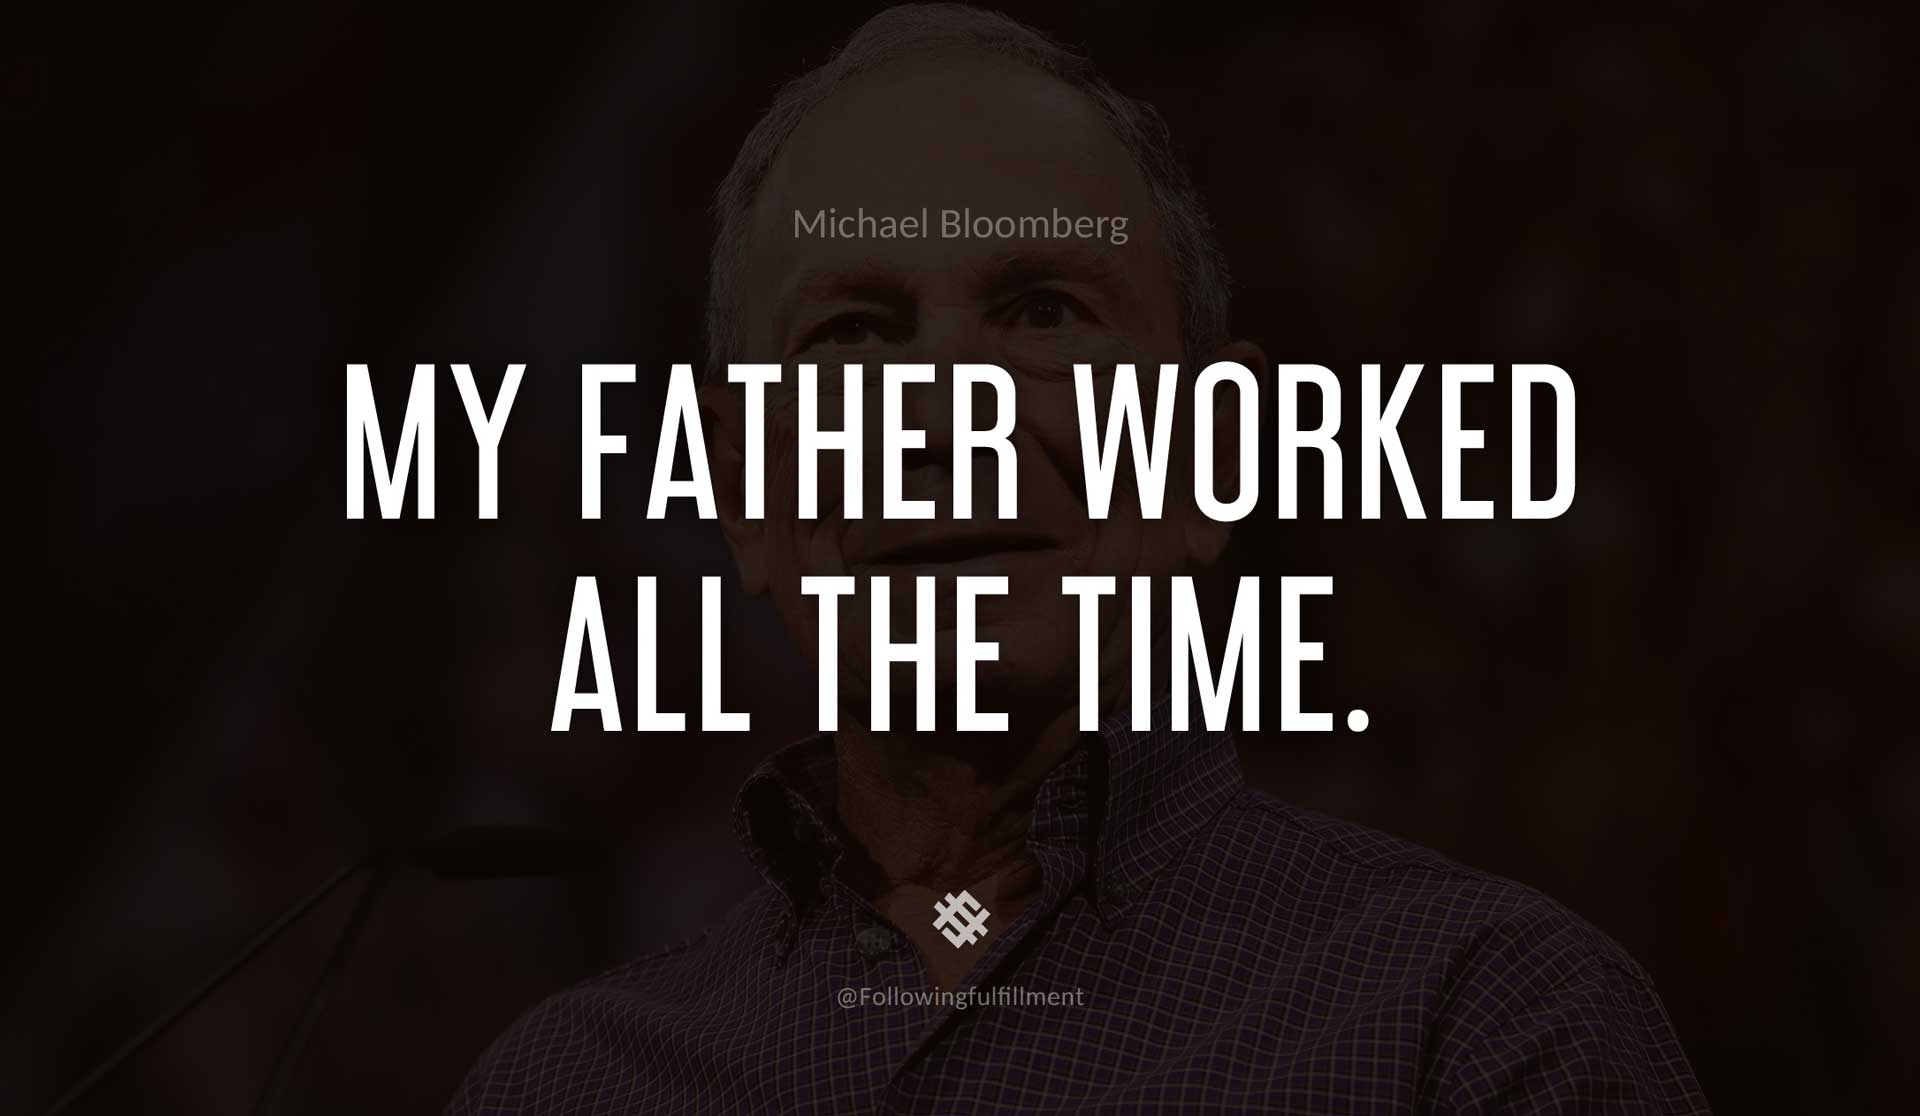 My-father-worked-all-the-time.-MICHAEL-BLOOMBERG-Quote.jpg